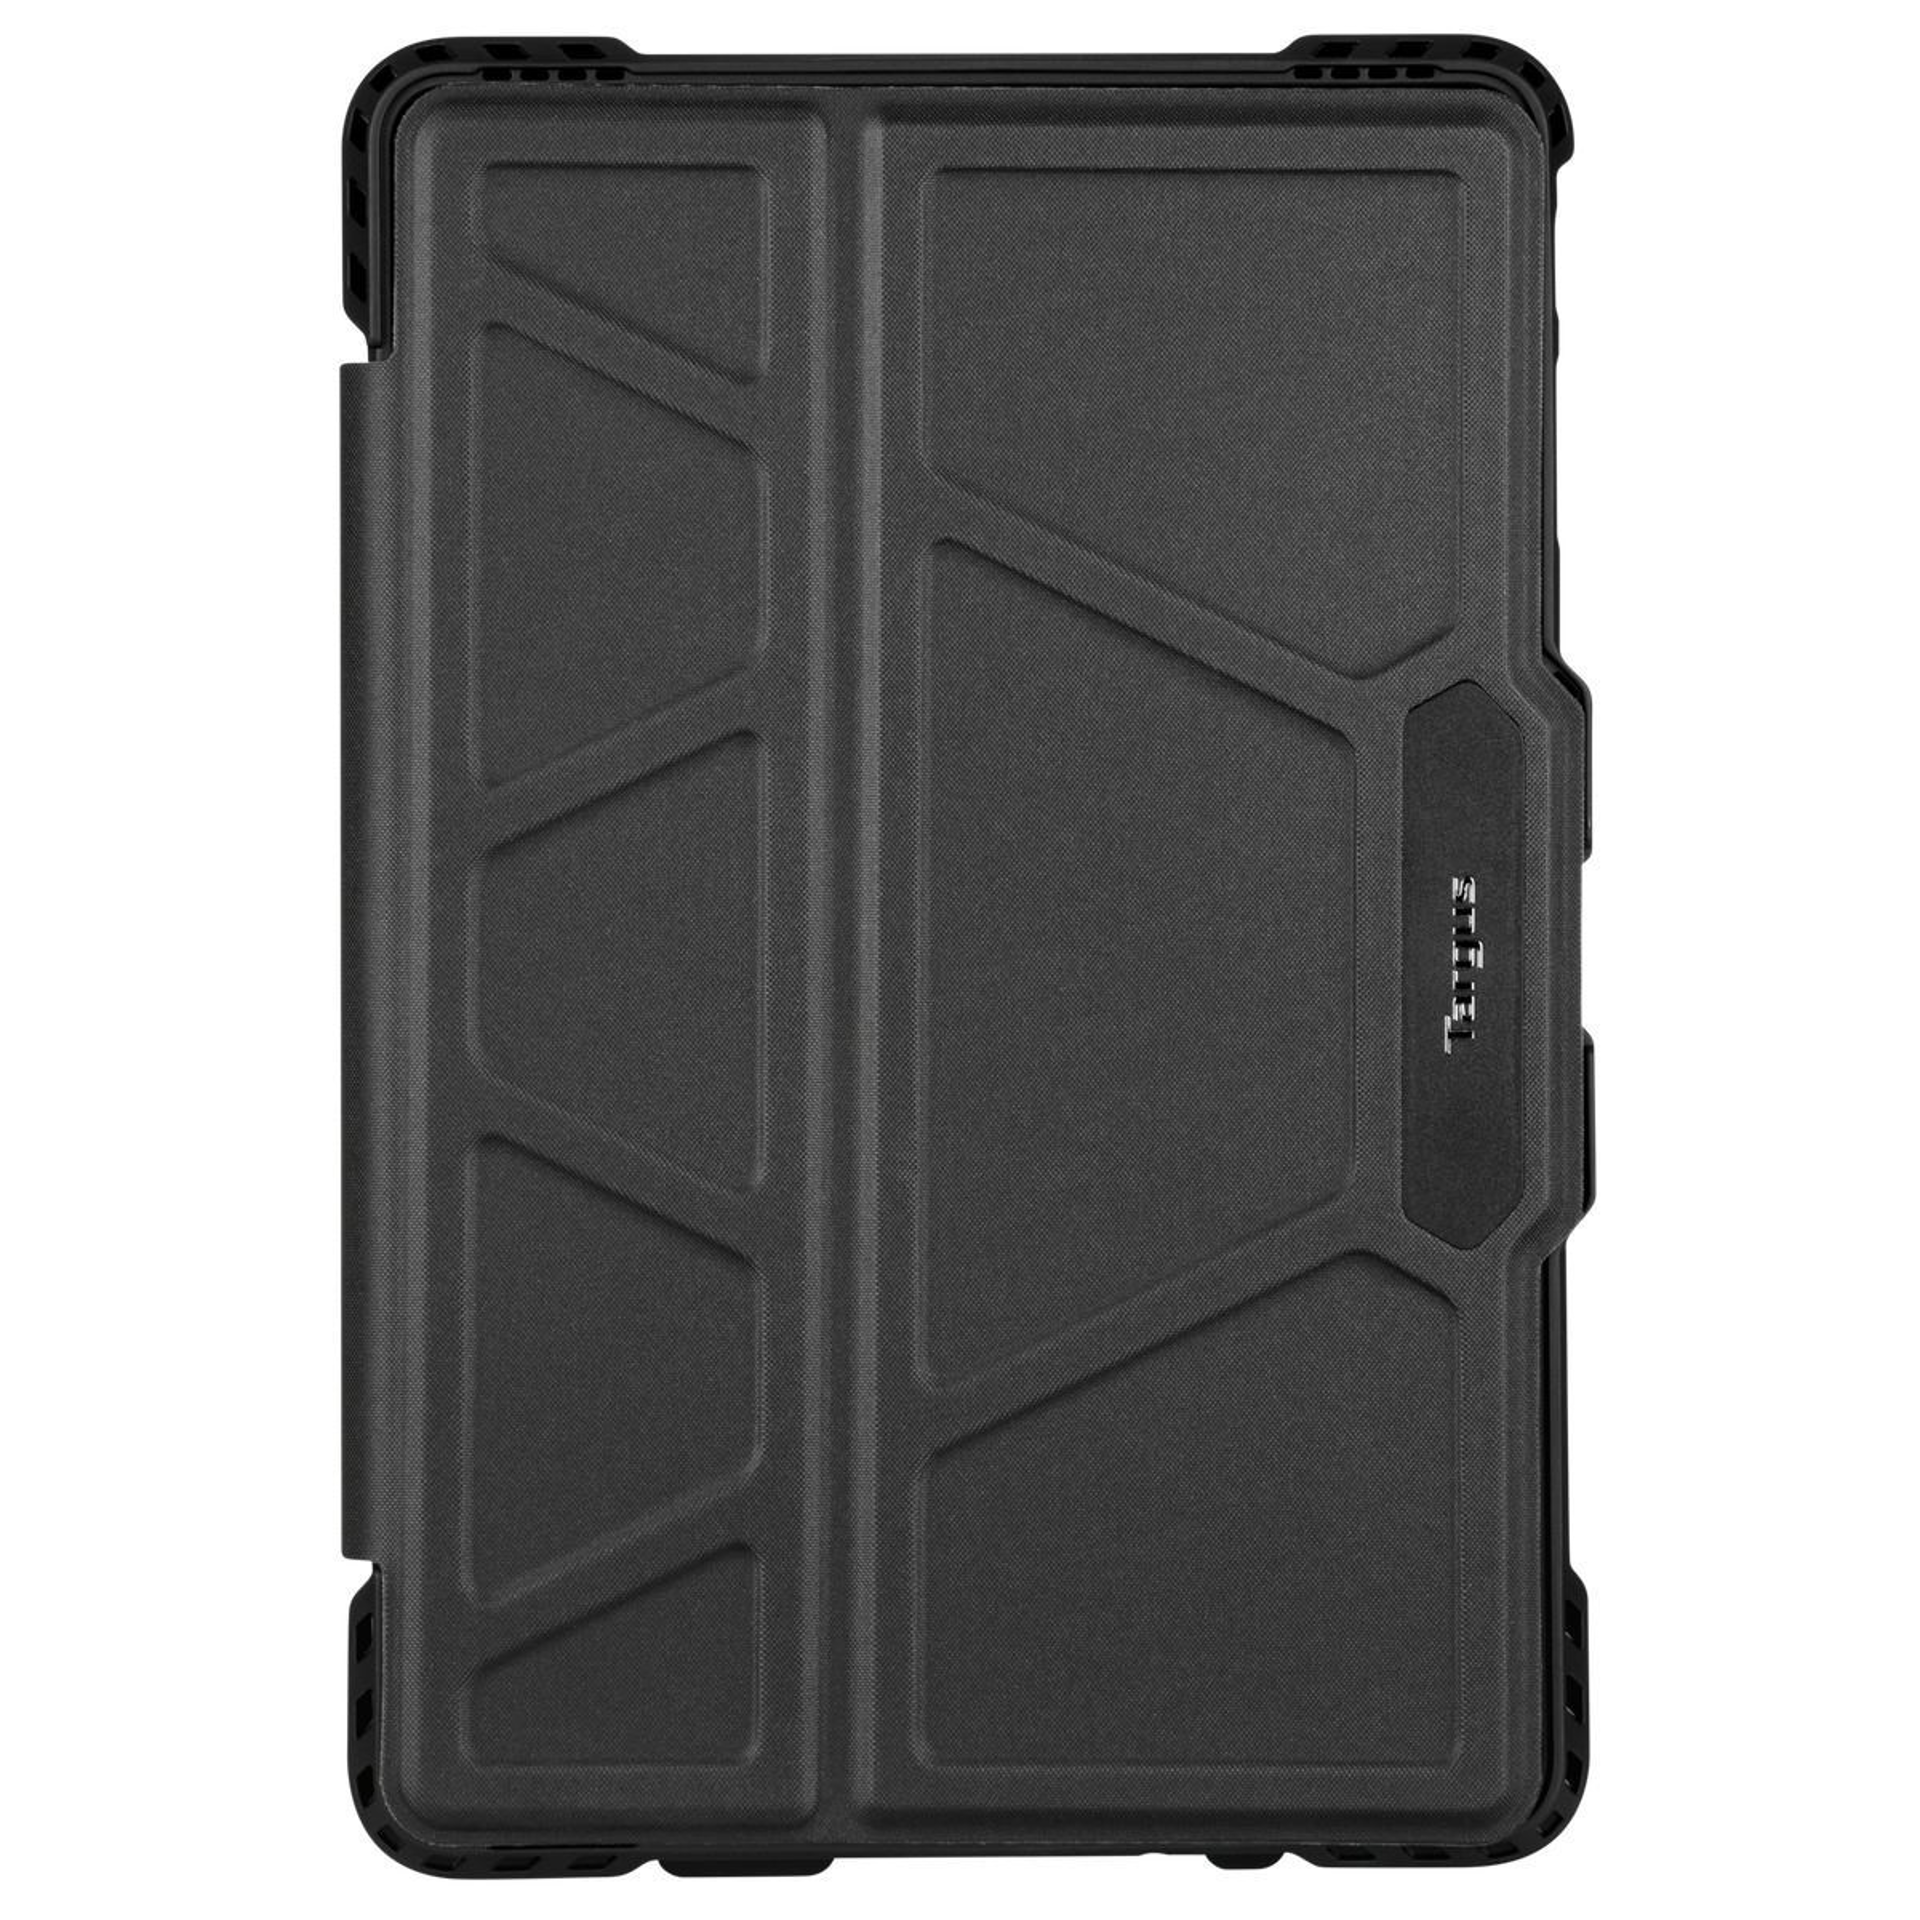 Targus Click-In case for Samsung Galaxy Tab S4 10.5" (2018) - Black